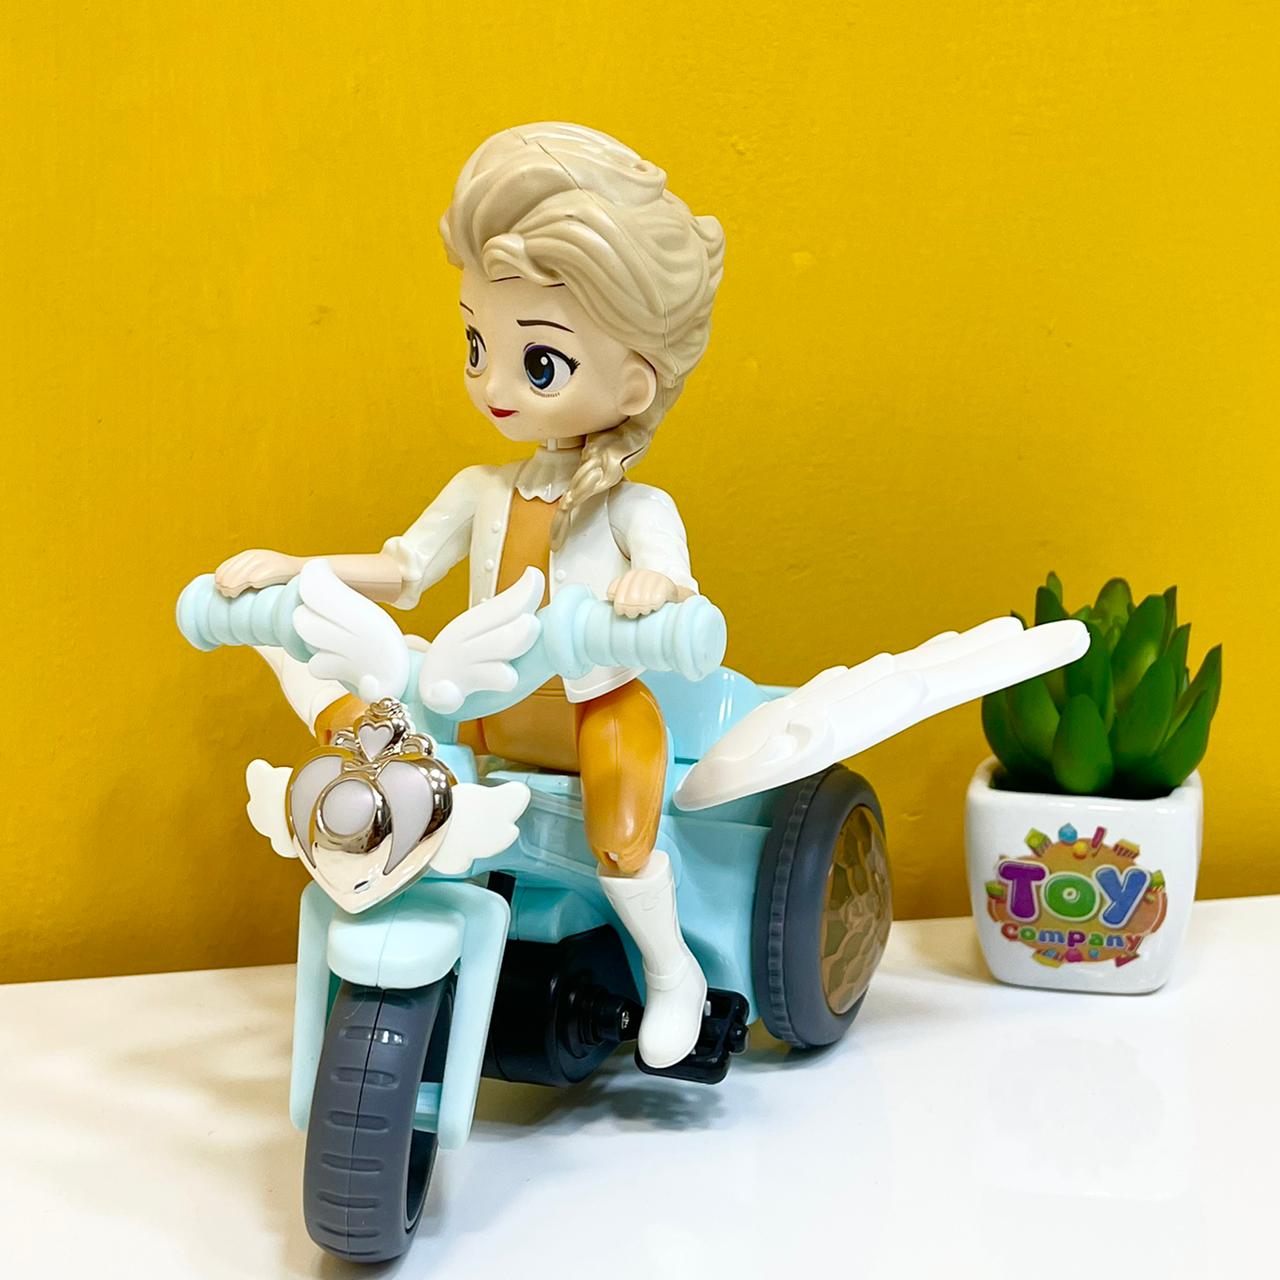 Musical Girl Bicycle Toy